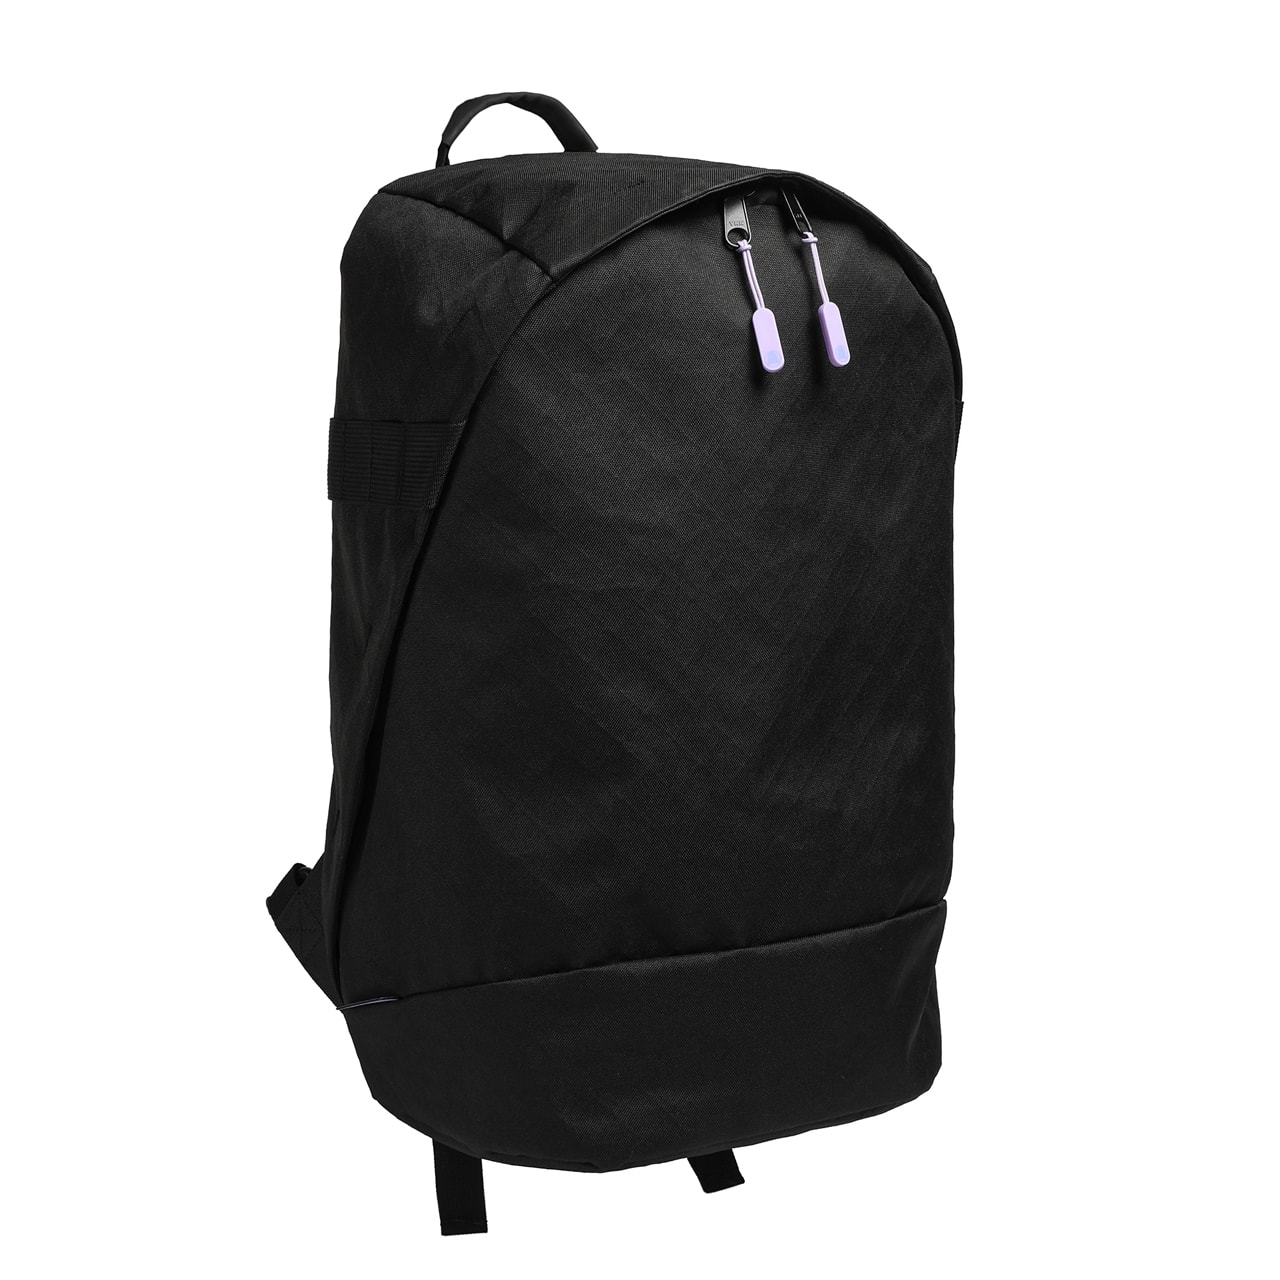 Ghostly International x DSPTCH Backpack Collaboration ridgepack northpak polyester film sail boat custom zipper release date info buy price color